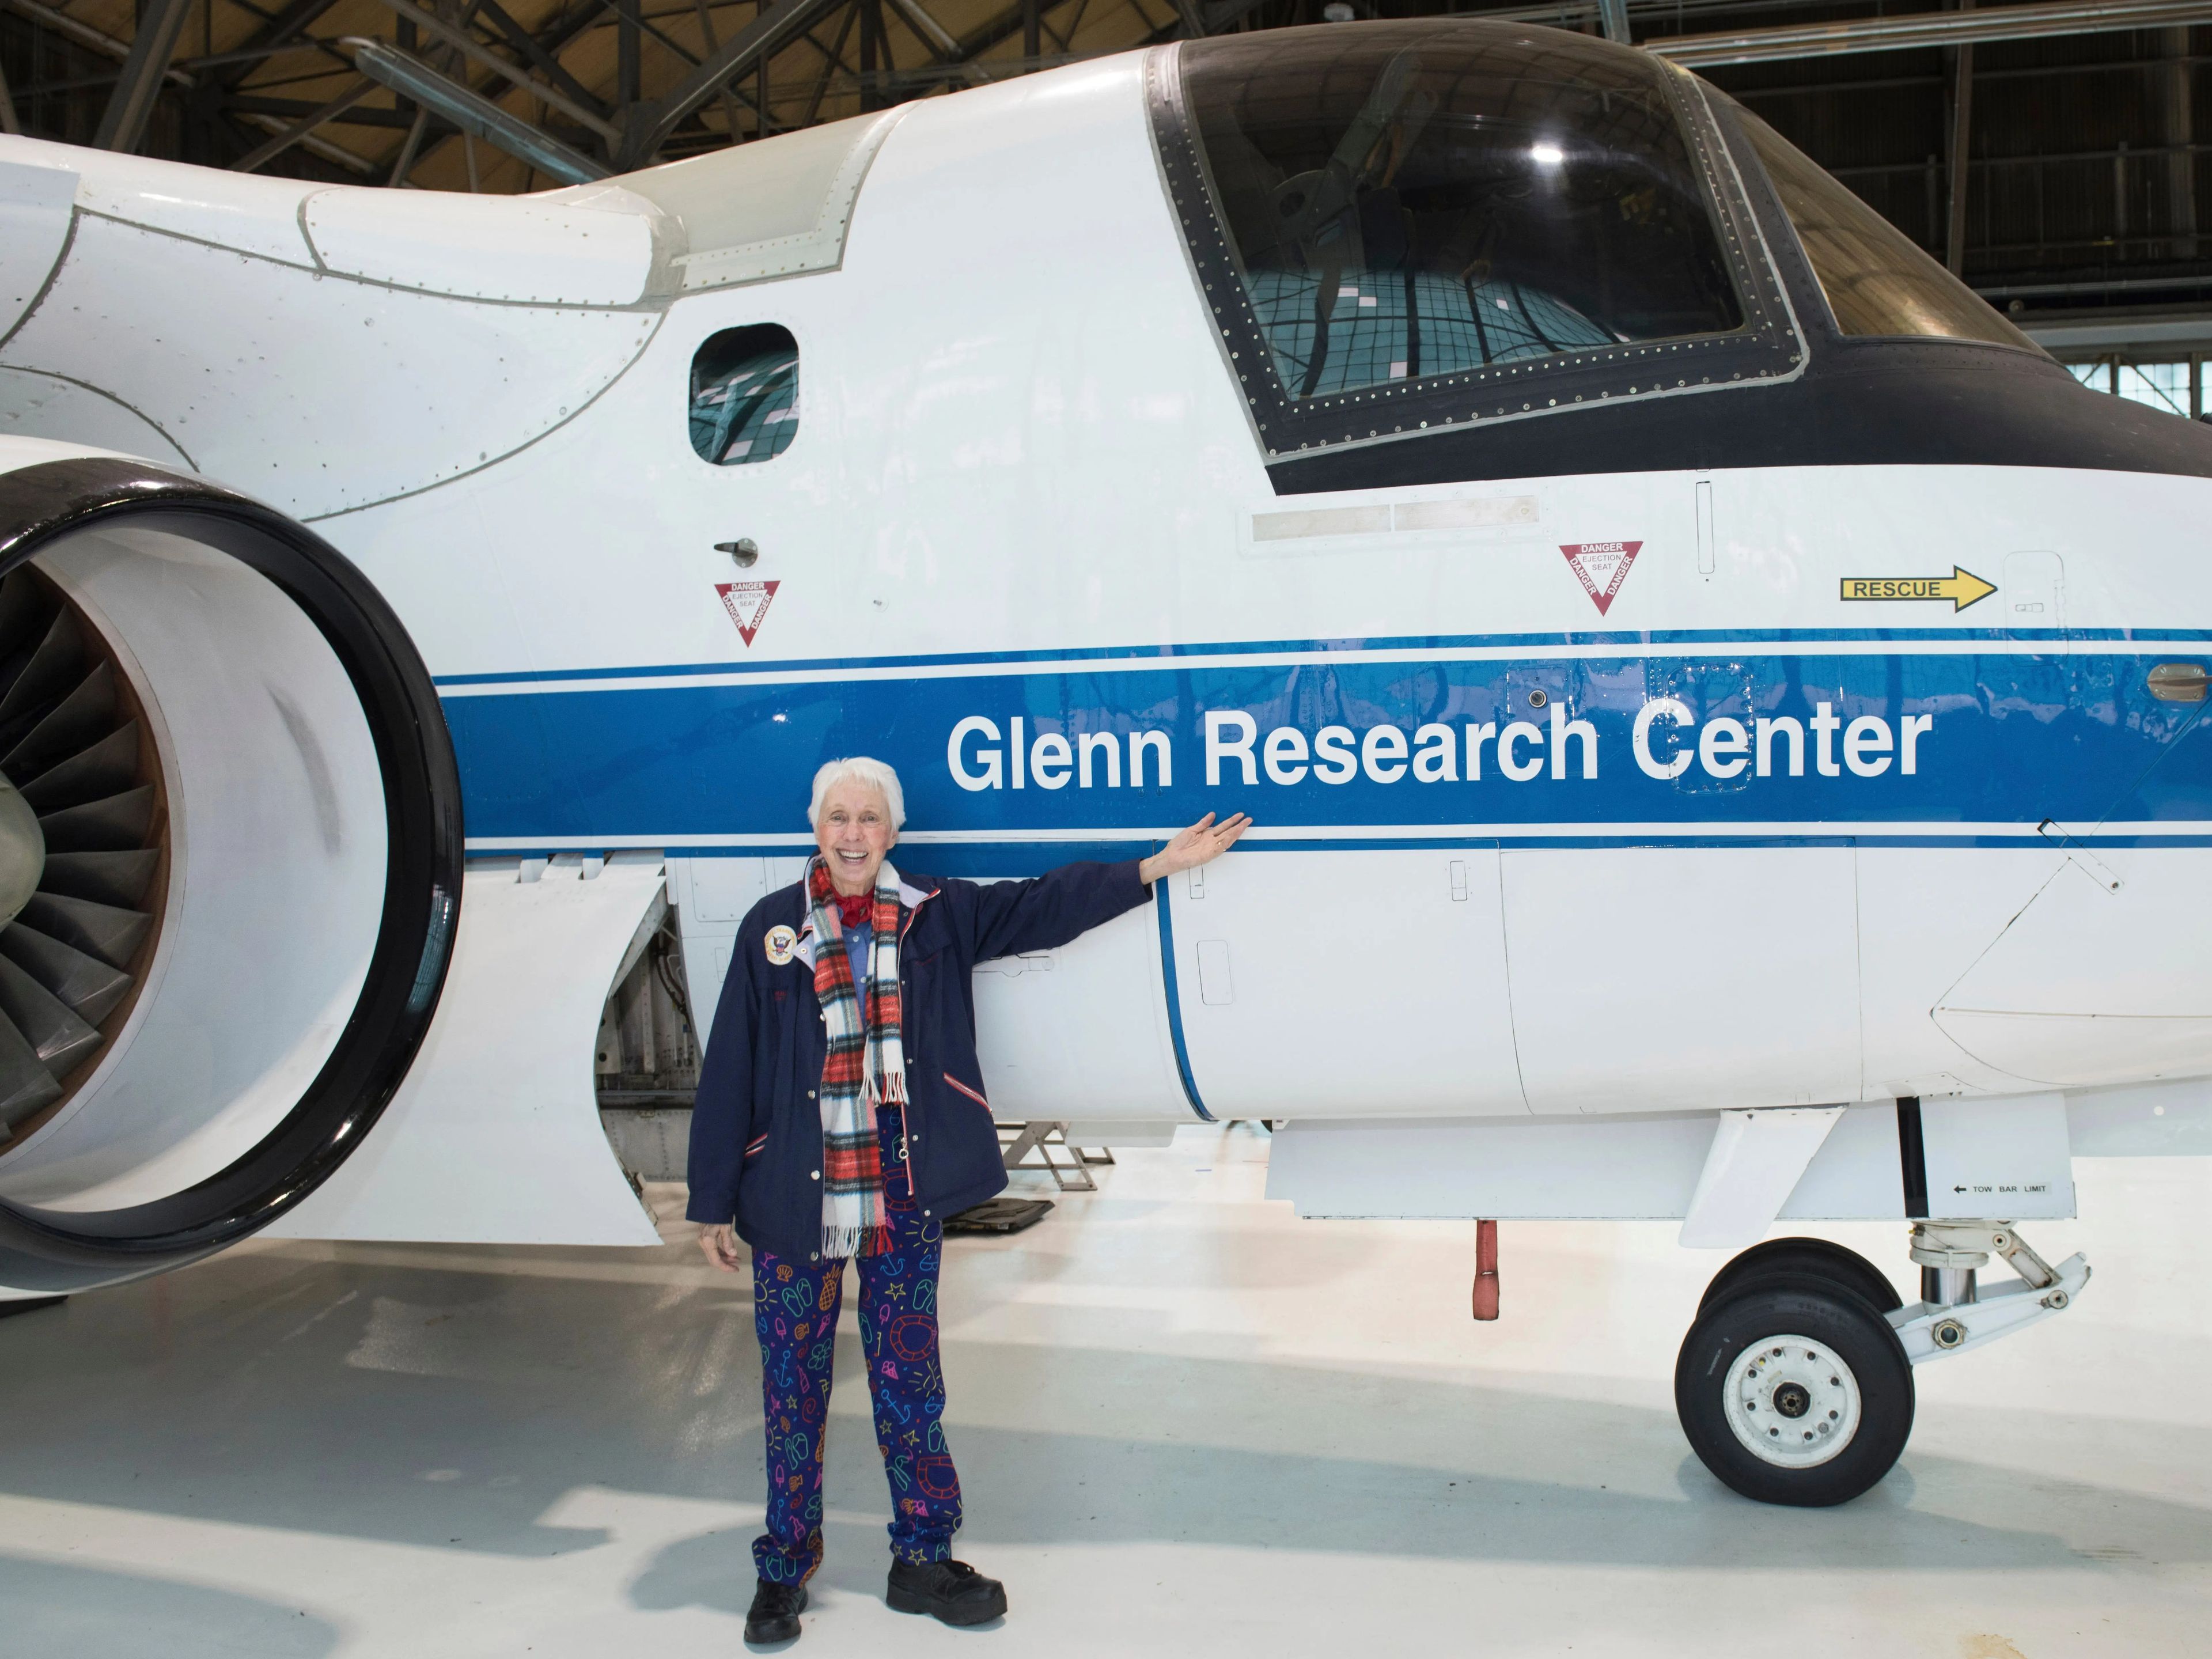 Wally Funk stands in front of a plane that reads Glenn Research Center